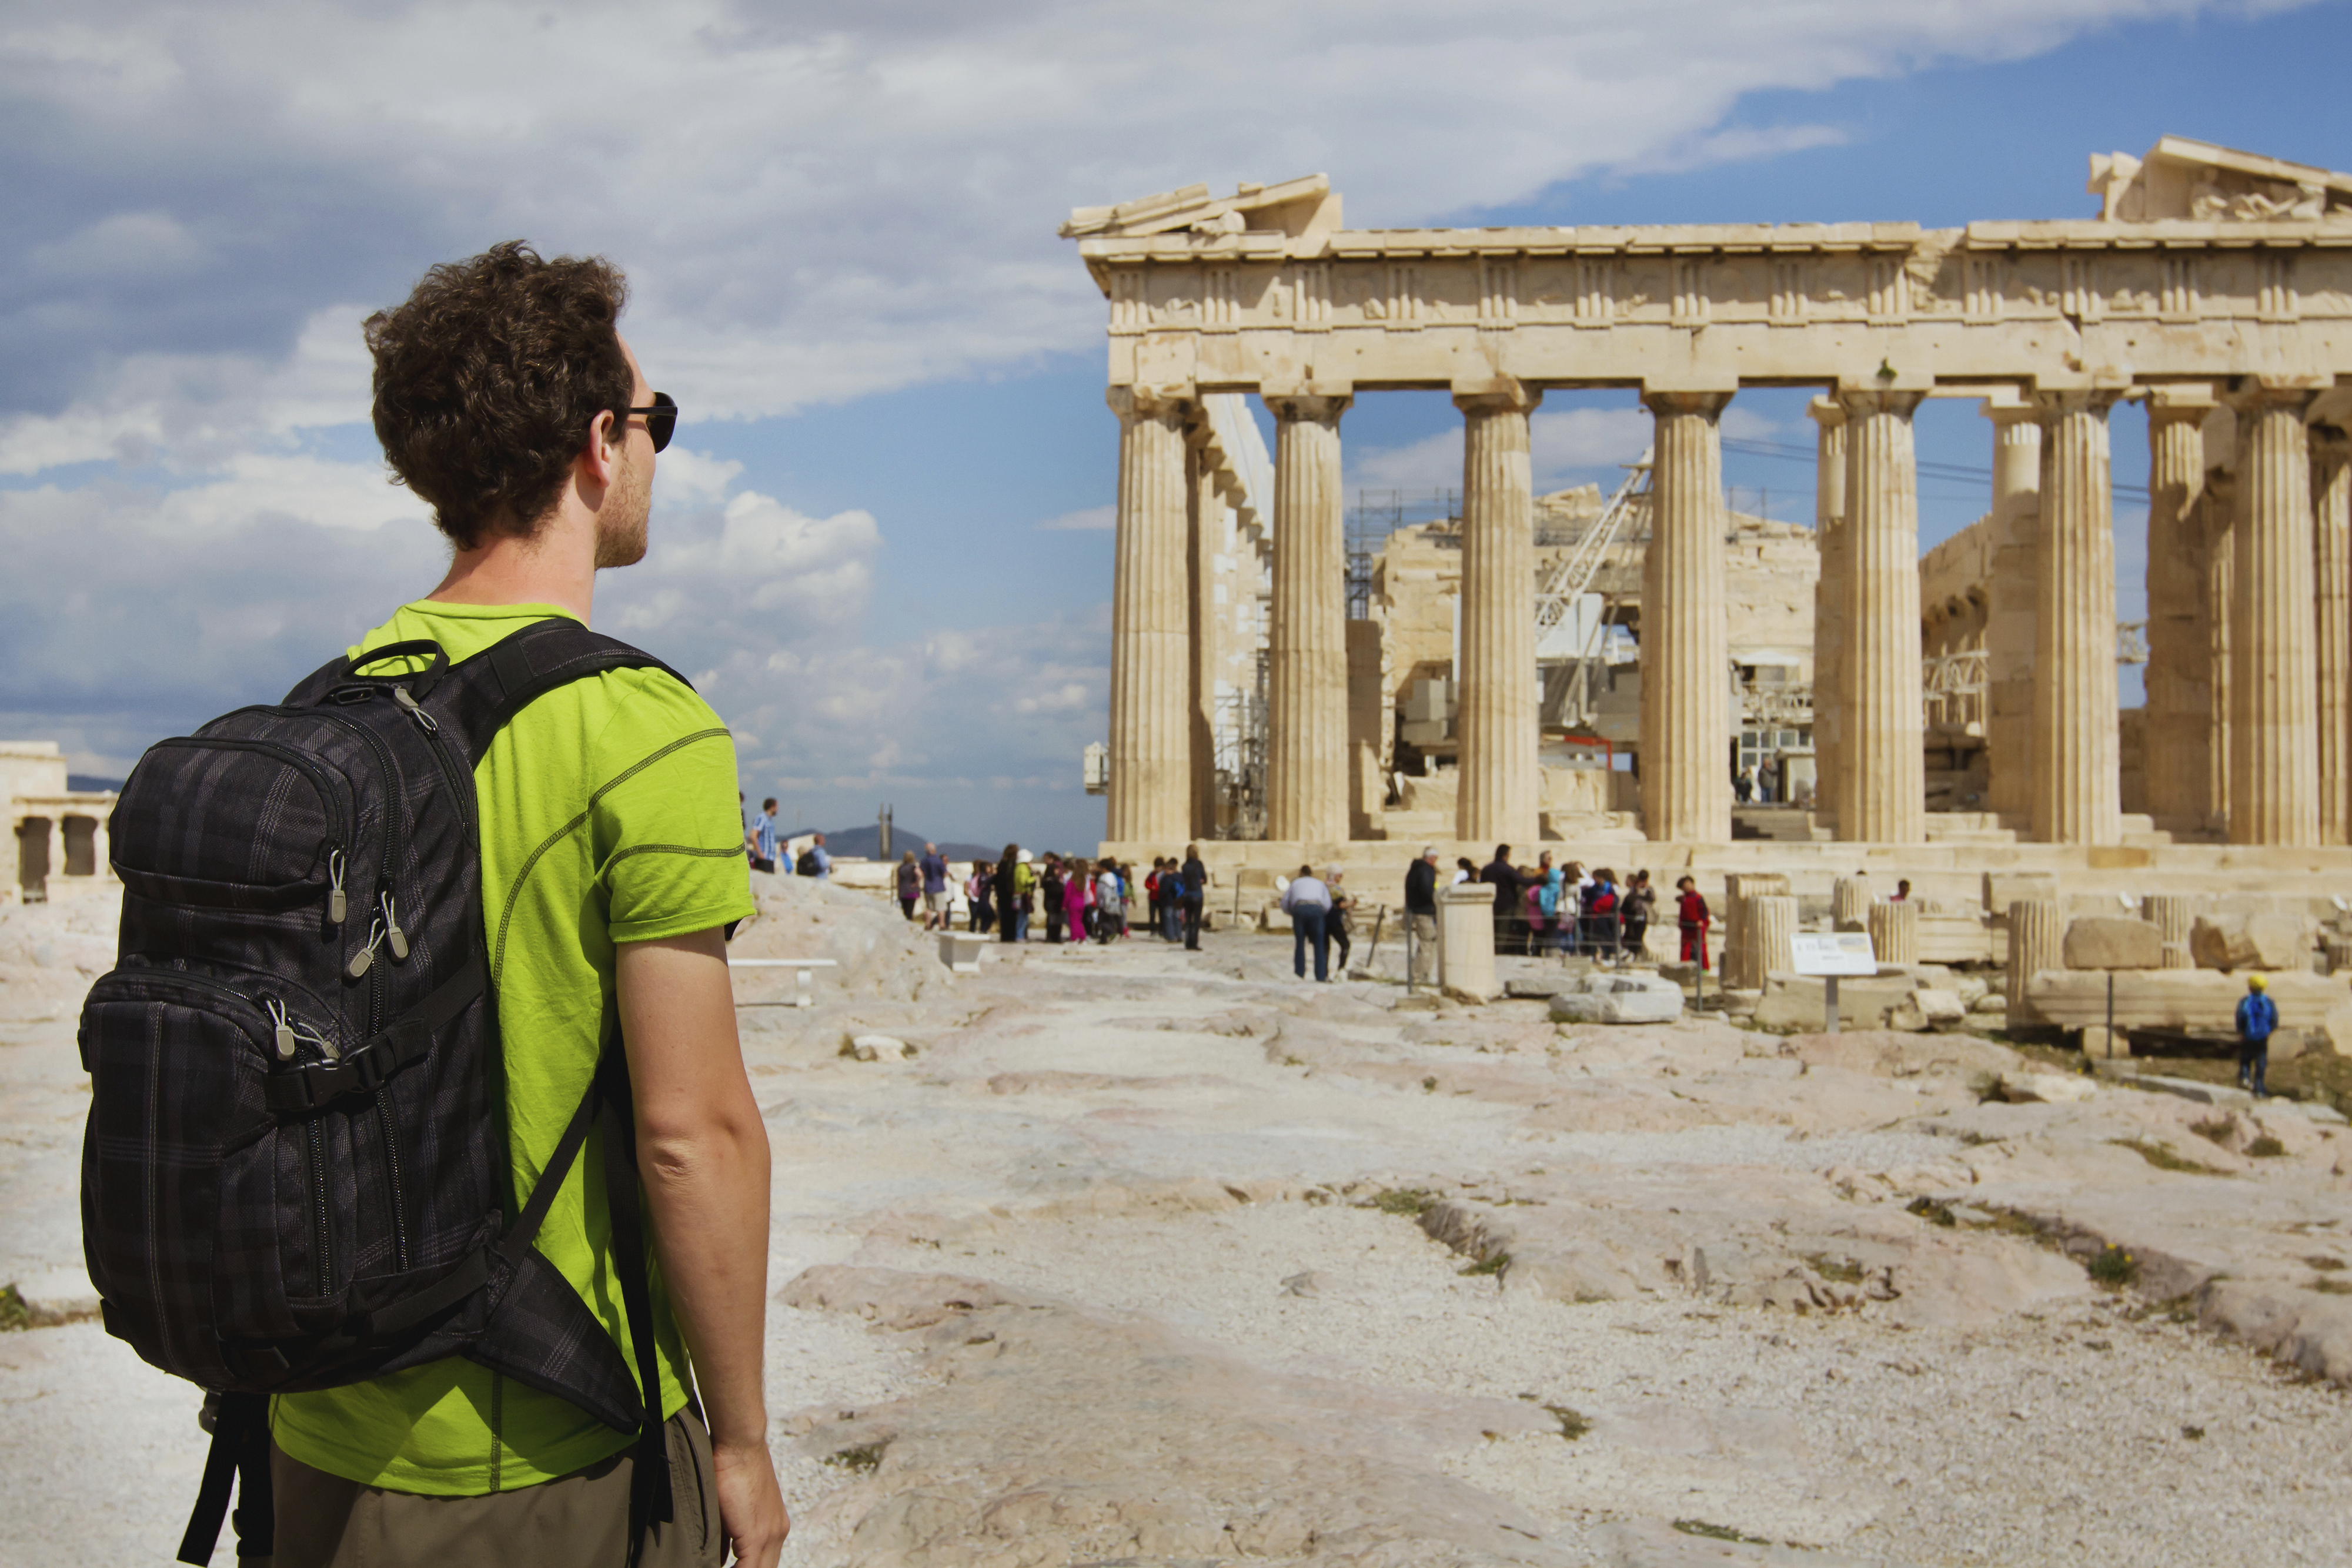 Backpacking Europe? Read These Books | StudentUniverse